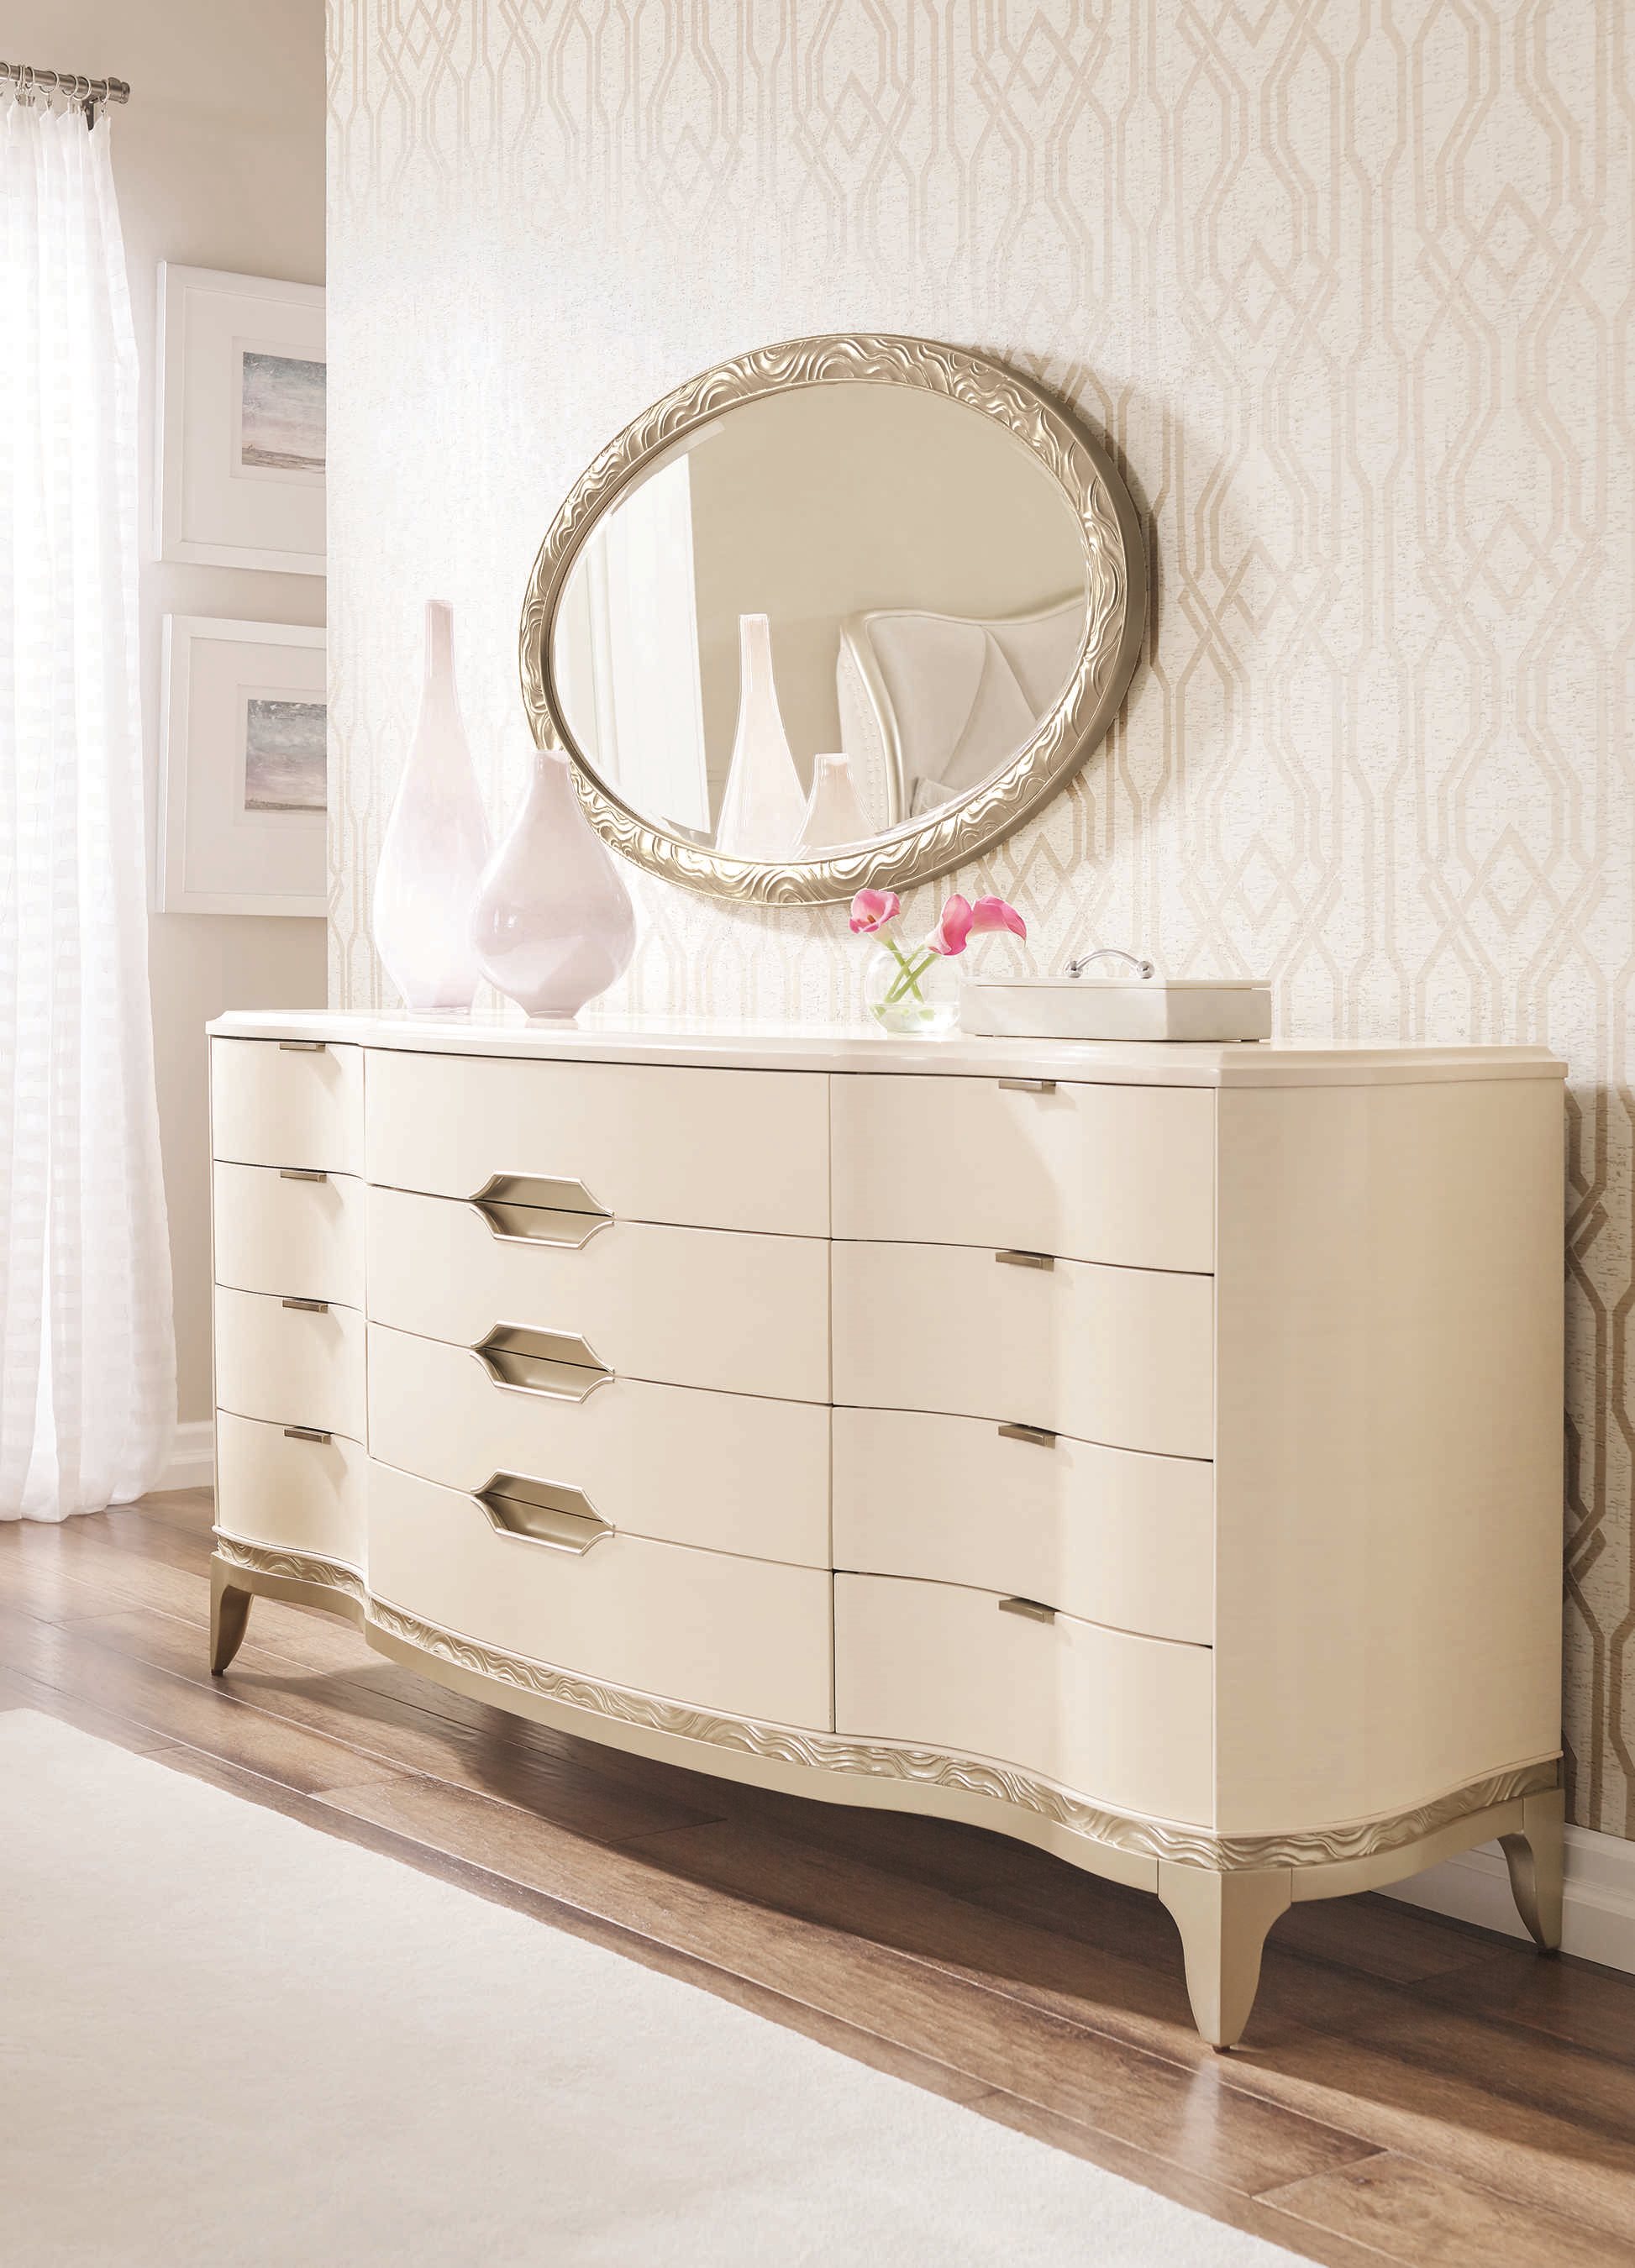 Caracole Compositions Adela Triple Dresser With Wall Mirror Set